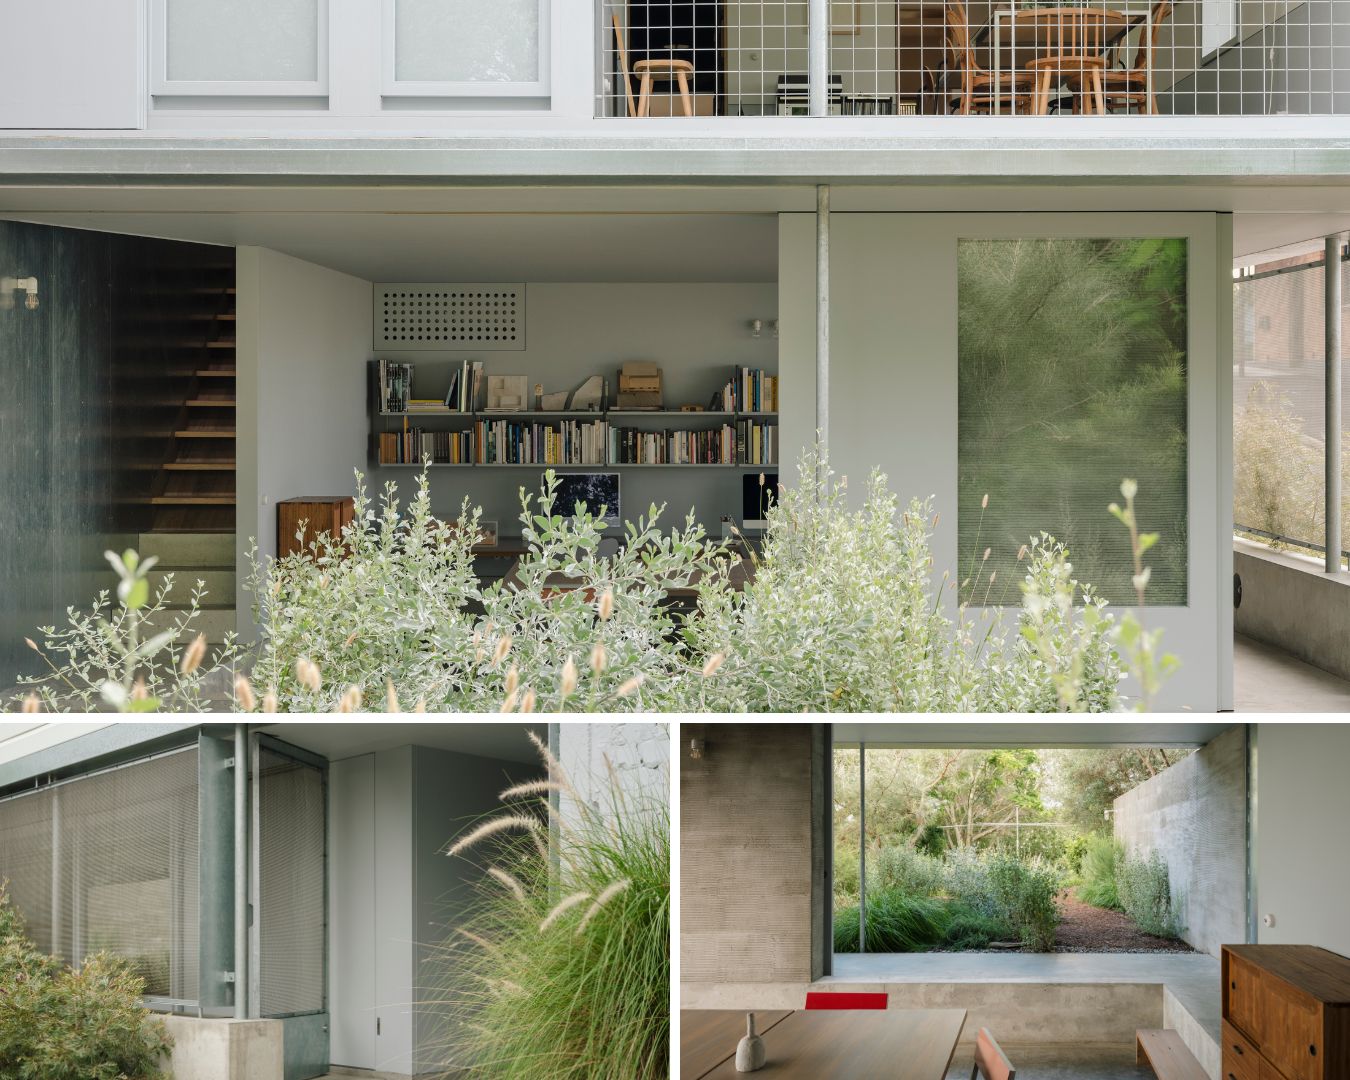 A collage shows parts of the home opening up to the garden outdoors.